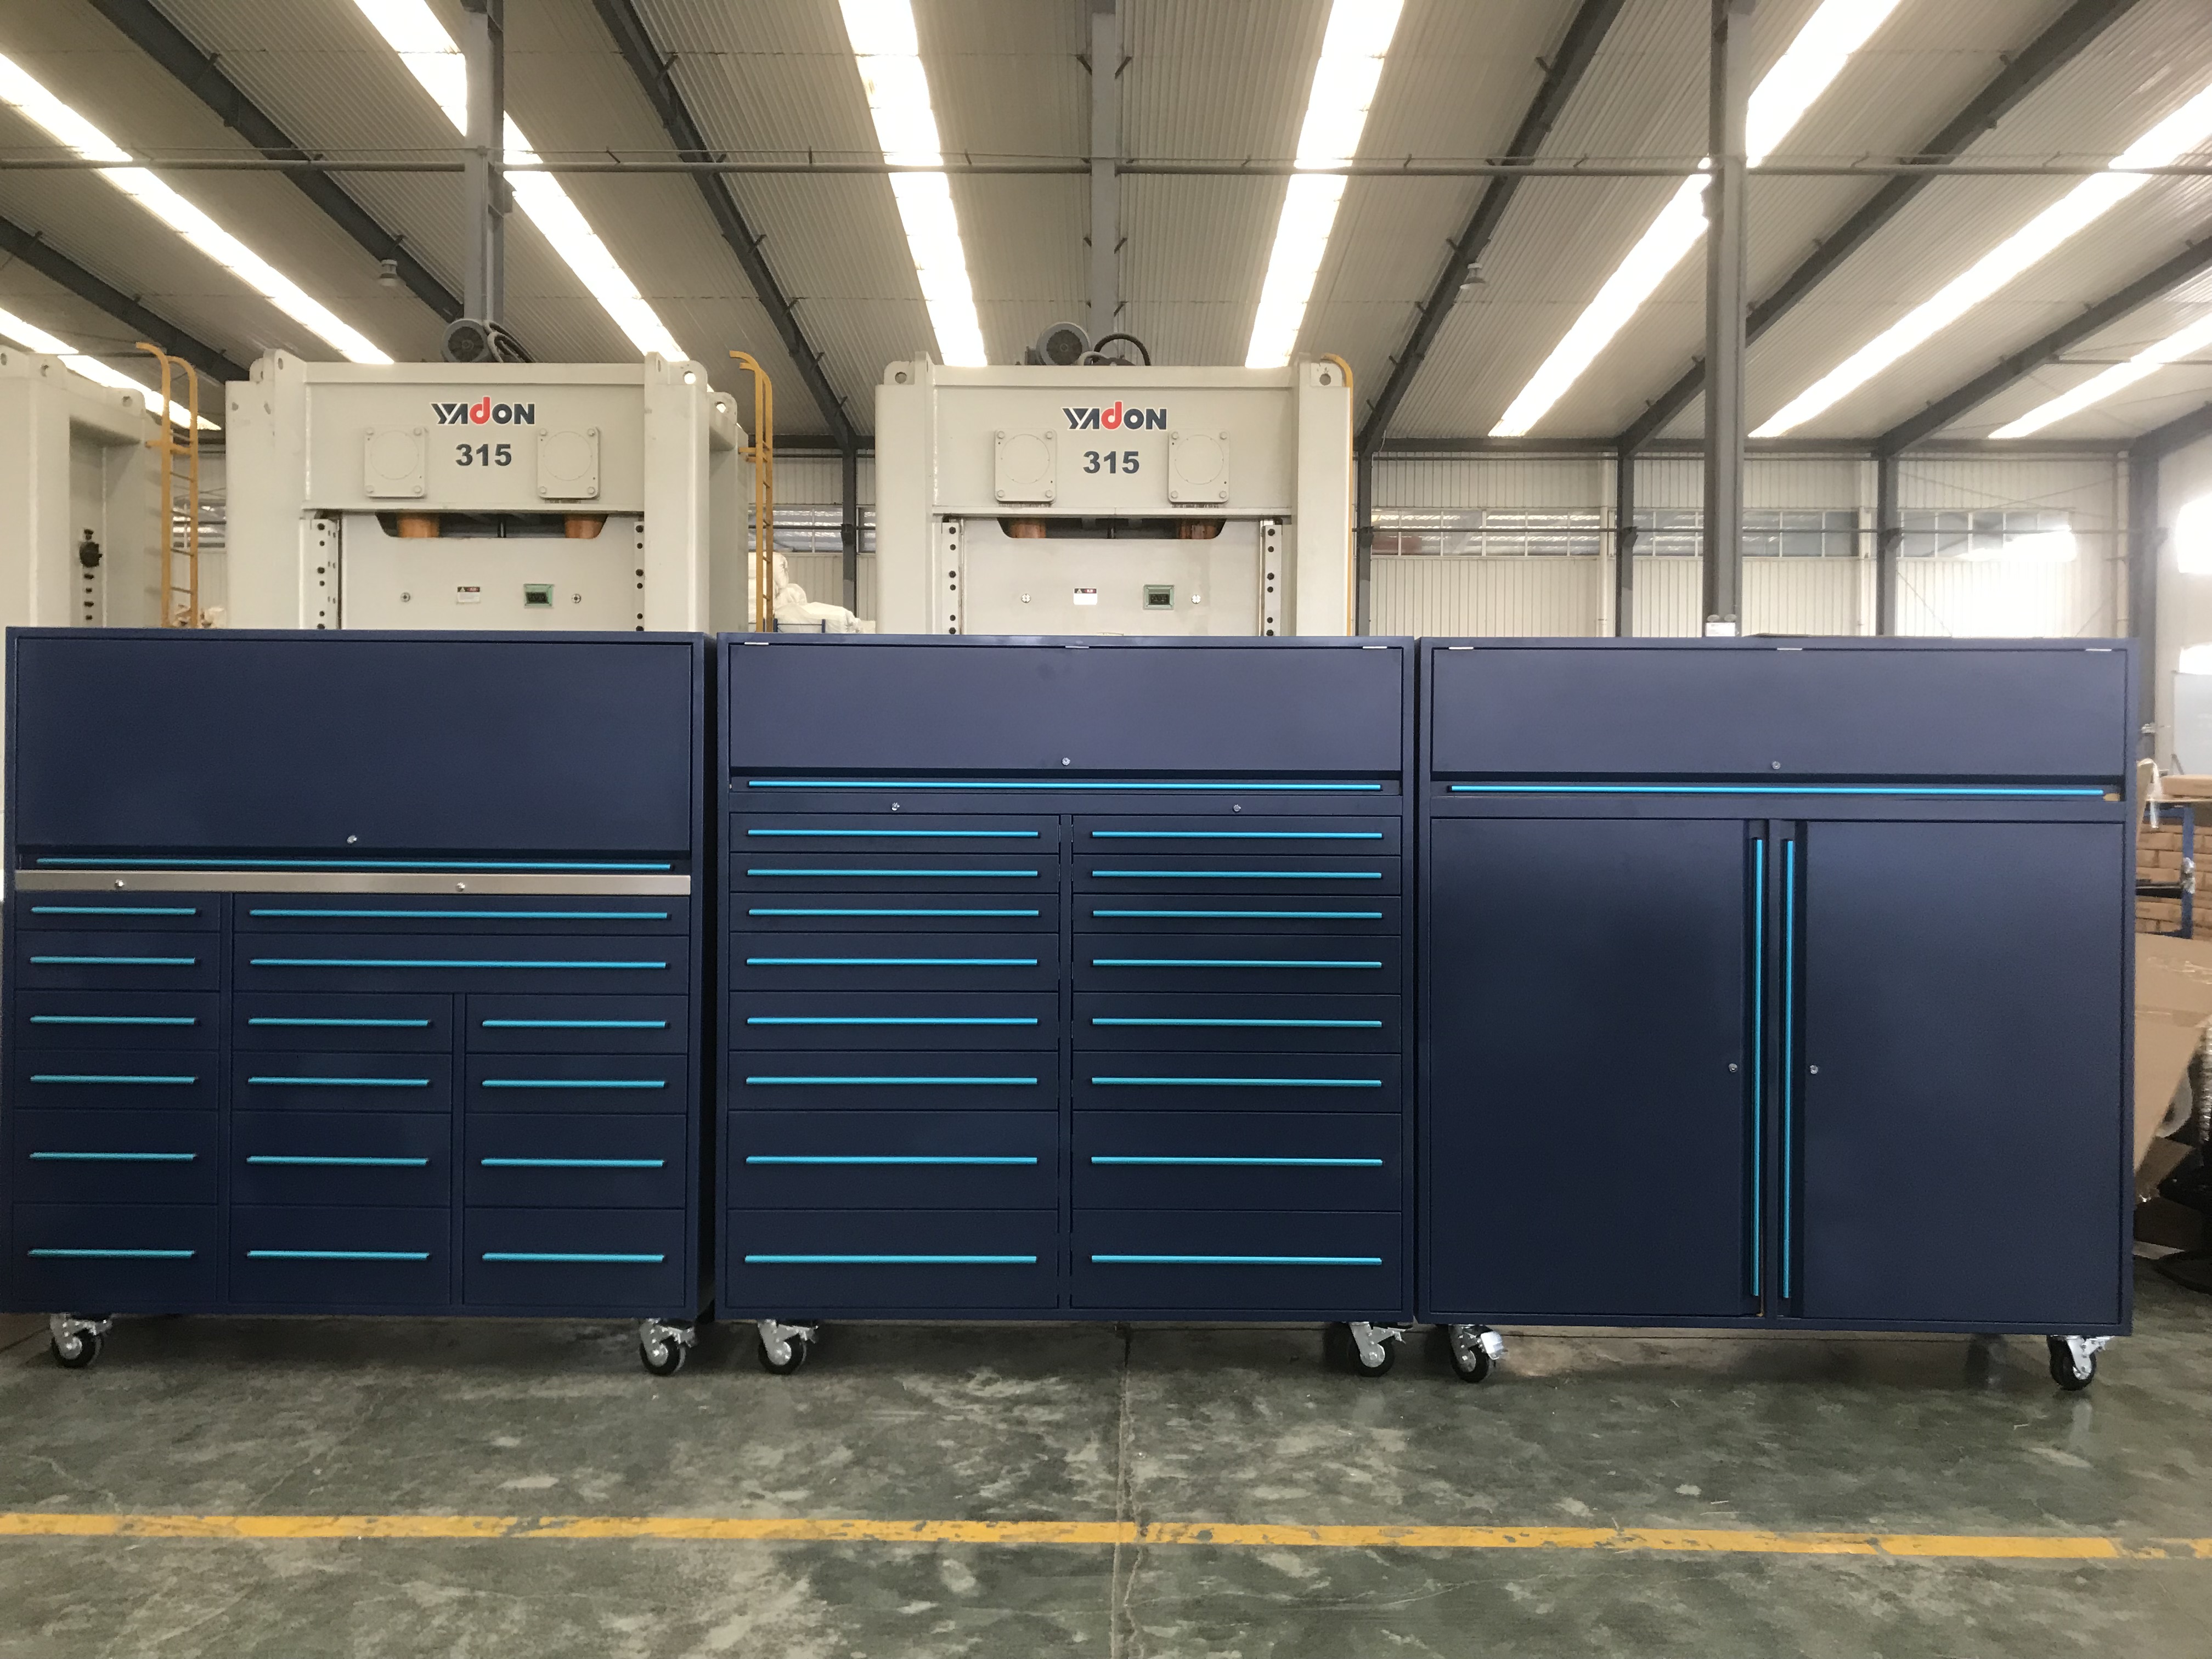 CYJY Company launches a new garage combination tool cabinet, which has been produced and ready for shipment.